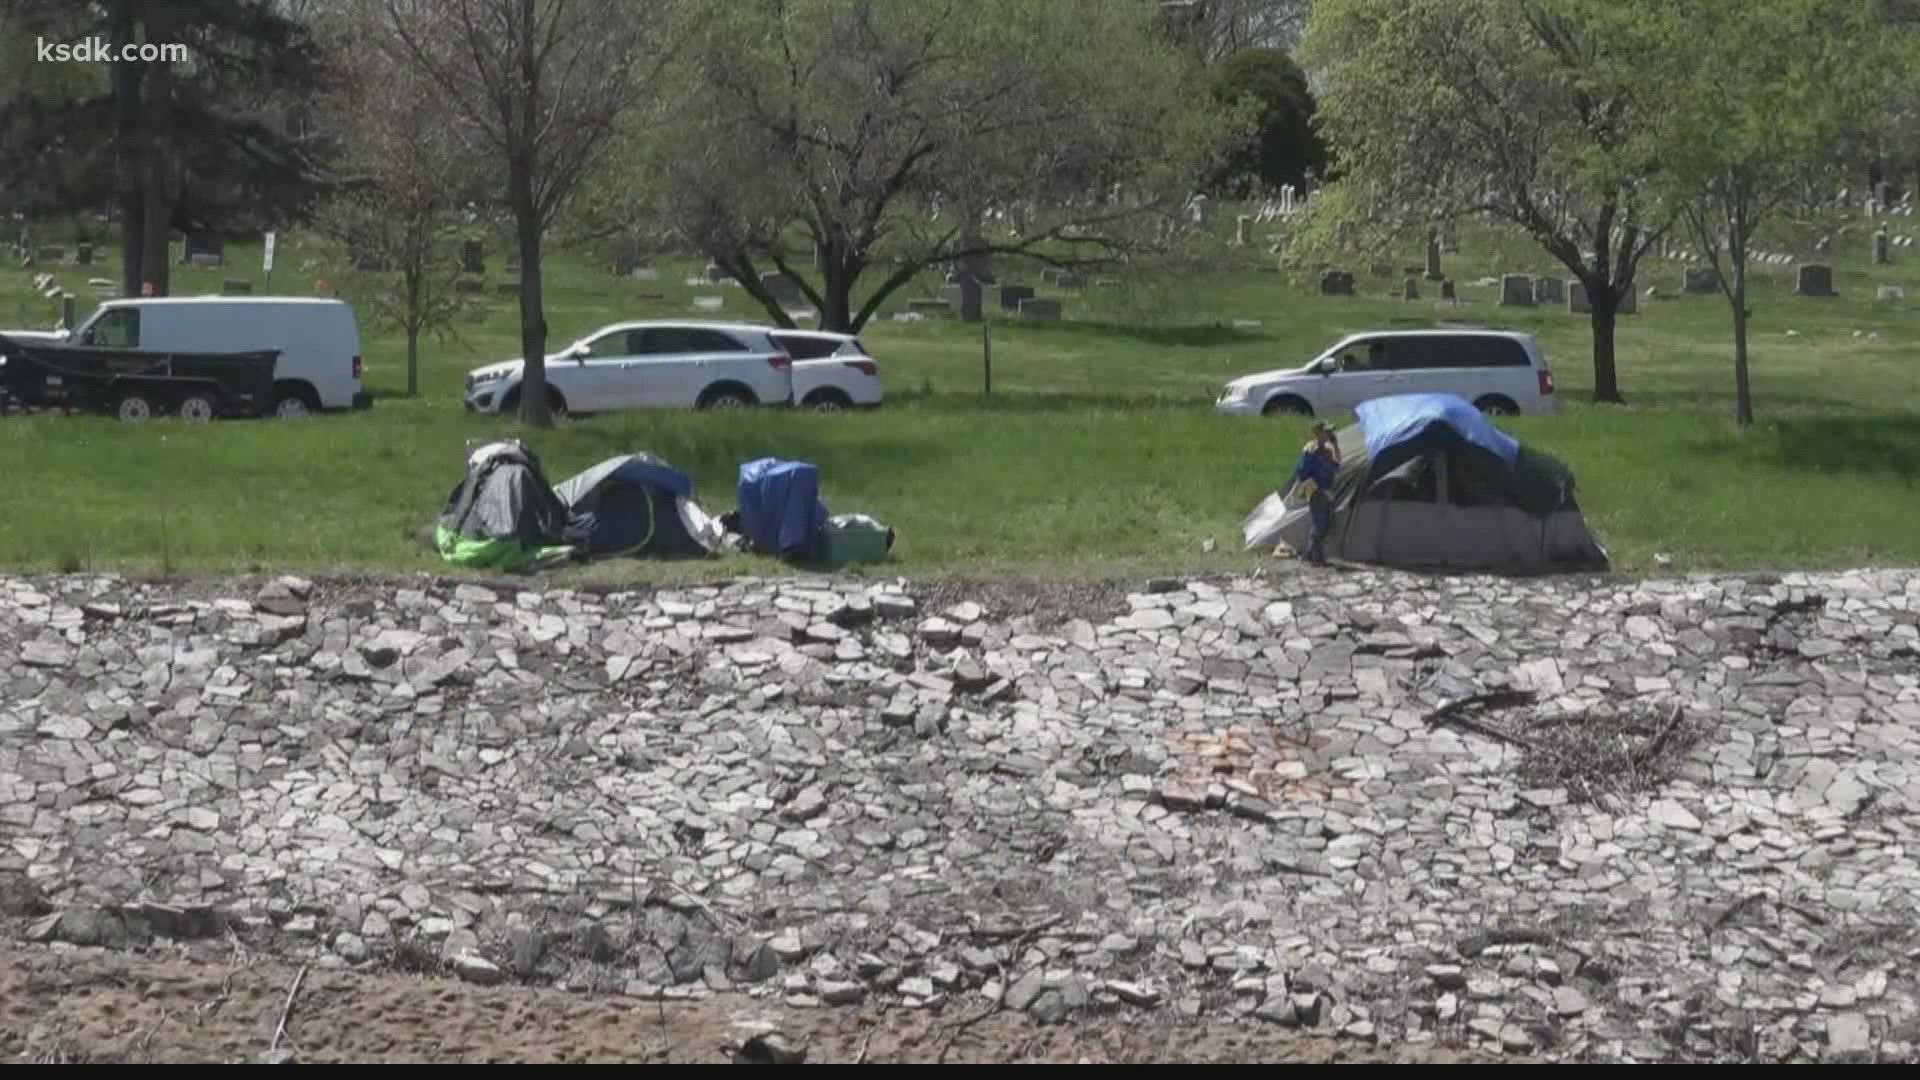 The city says for weeks they have been working with people living in tents to find more suitable housing.